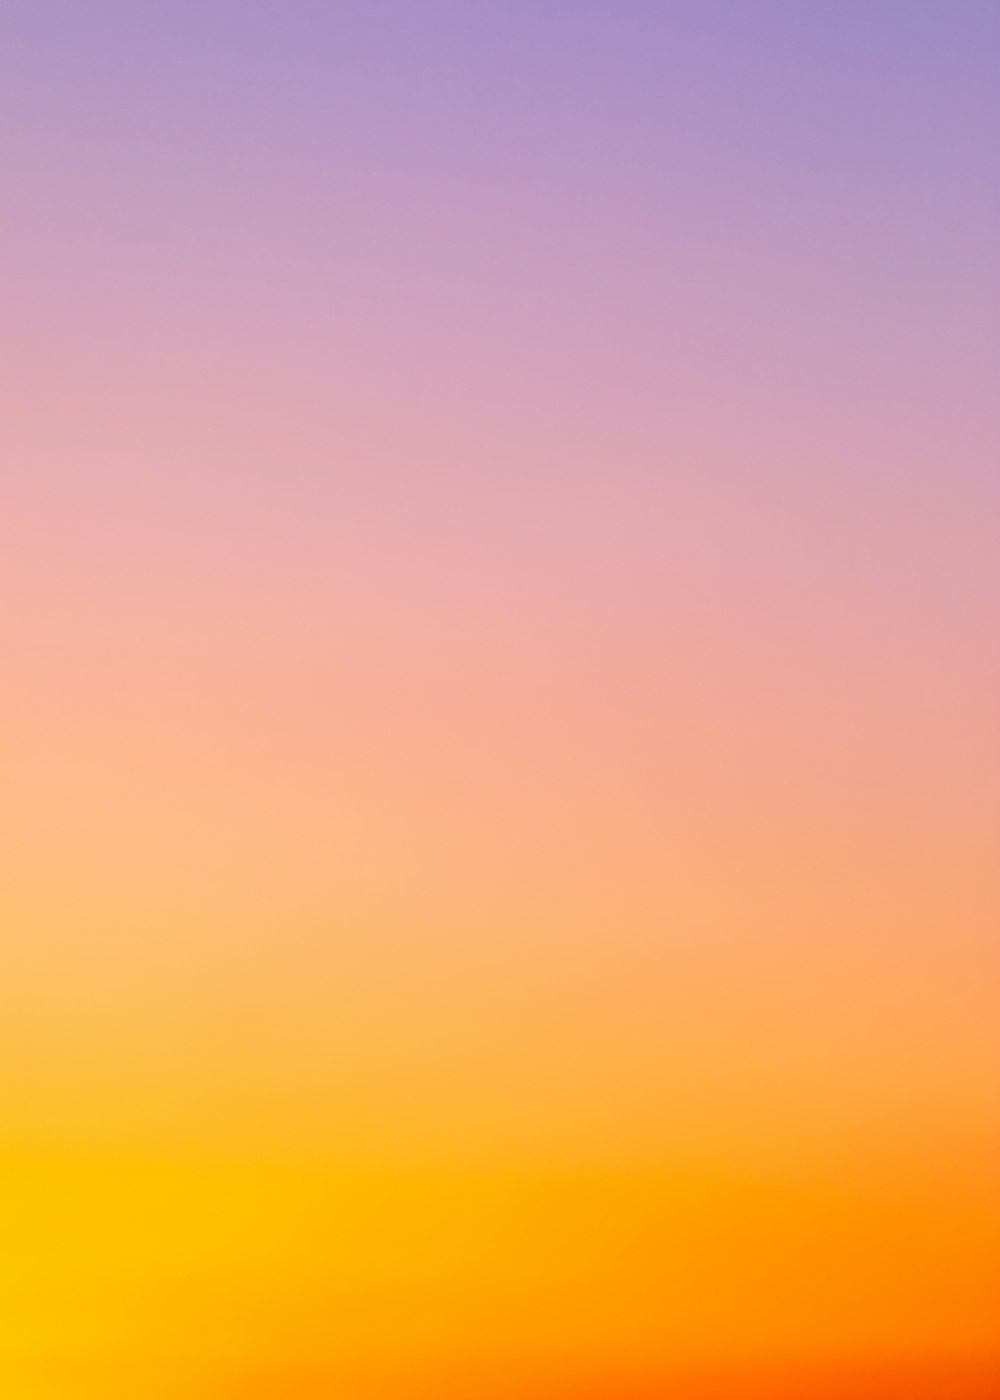 Yellow Gradient Pictures | Download Free Images on Unsplash